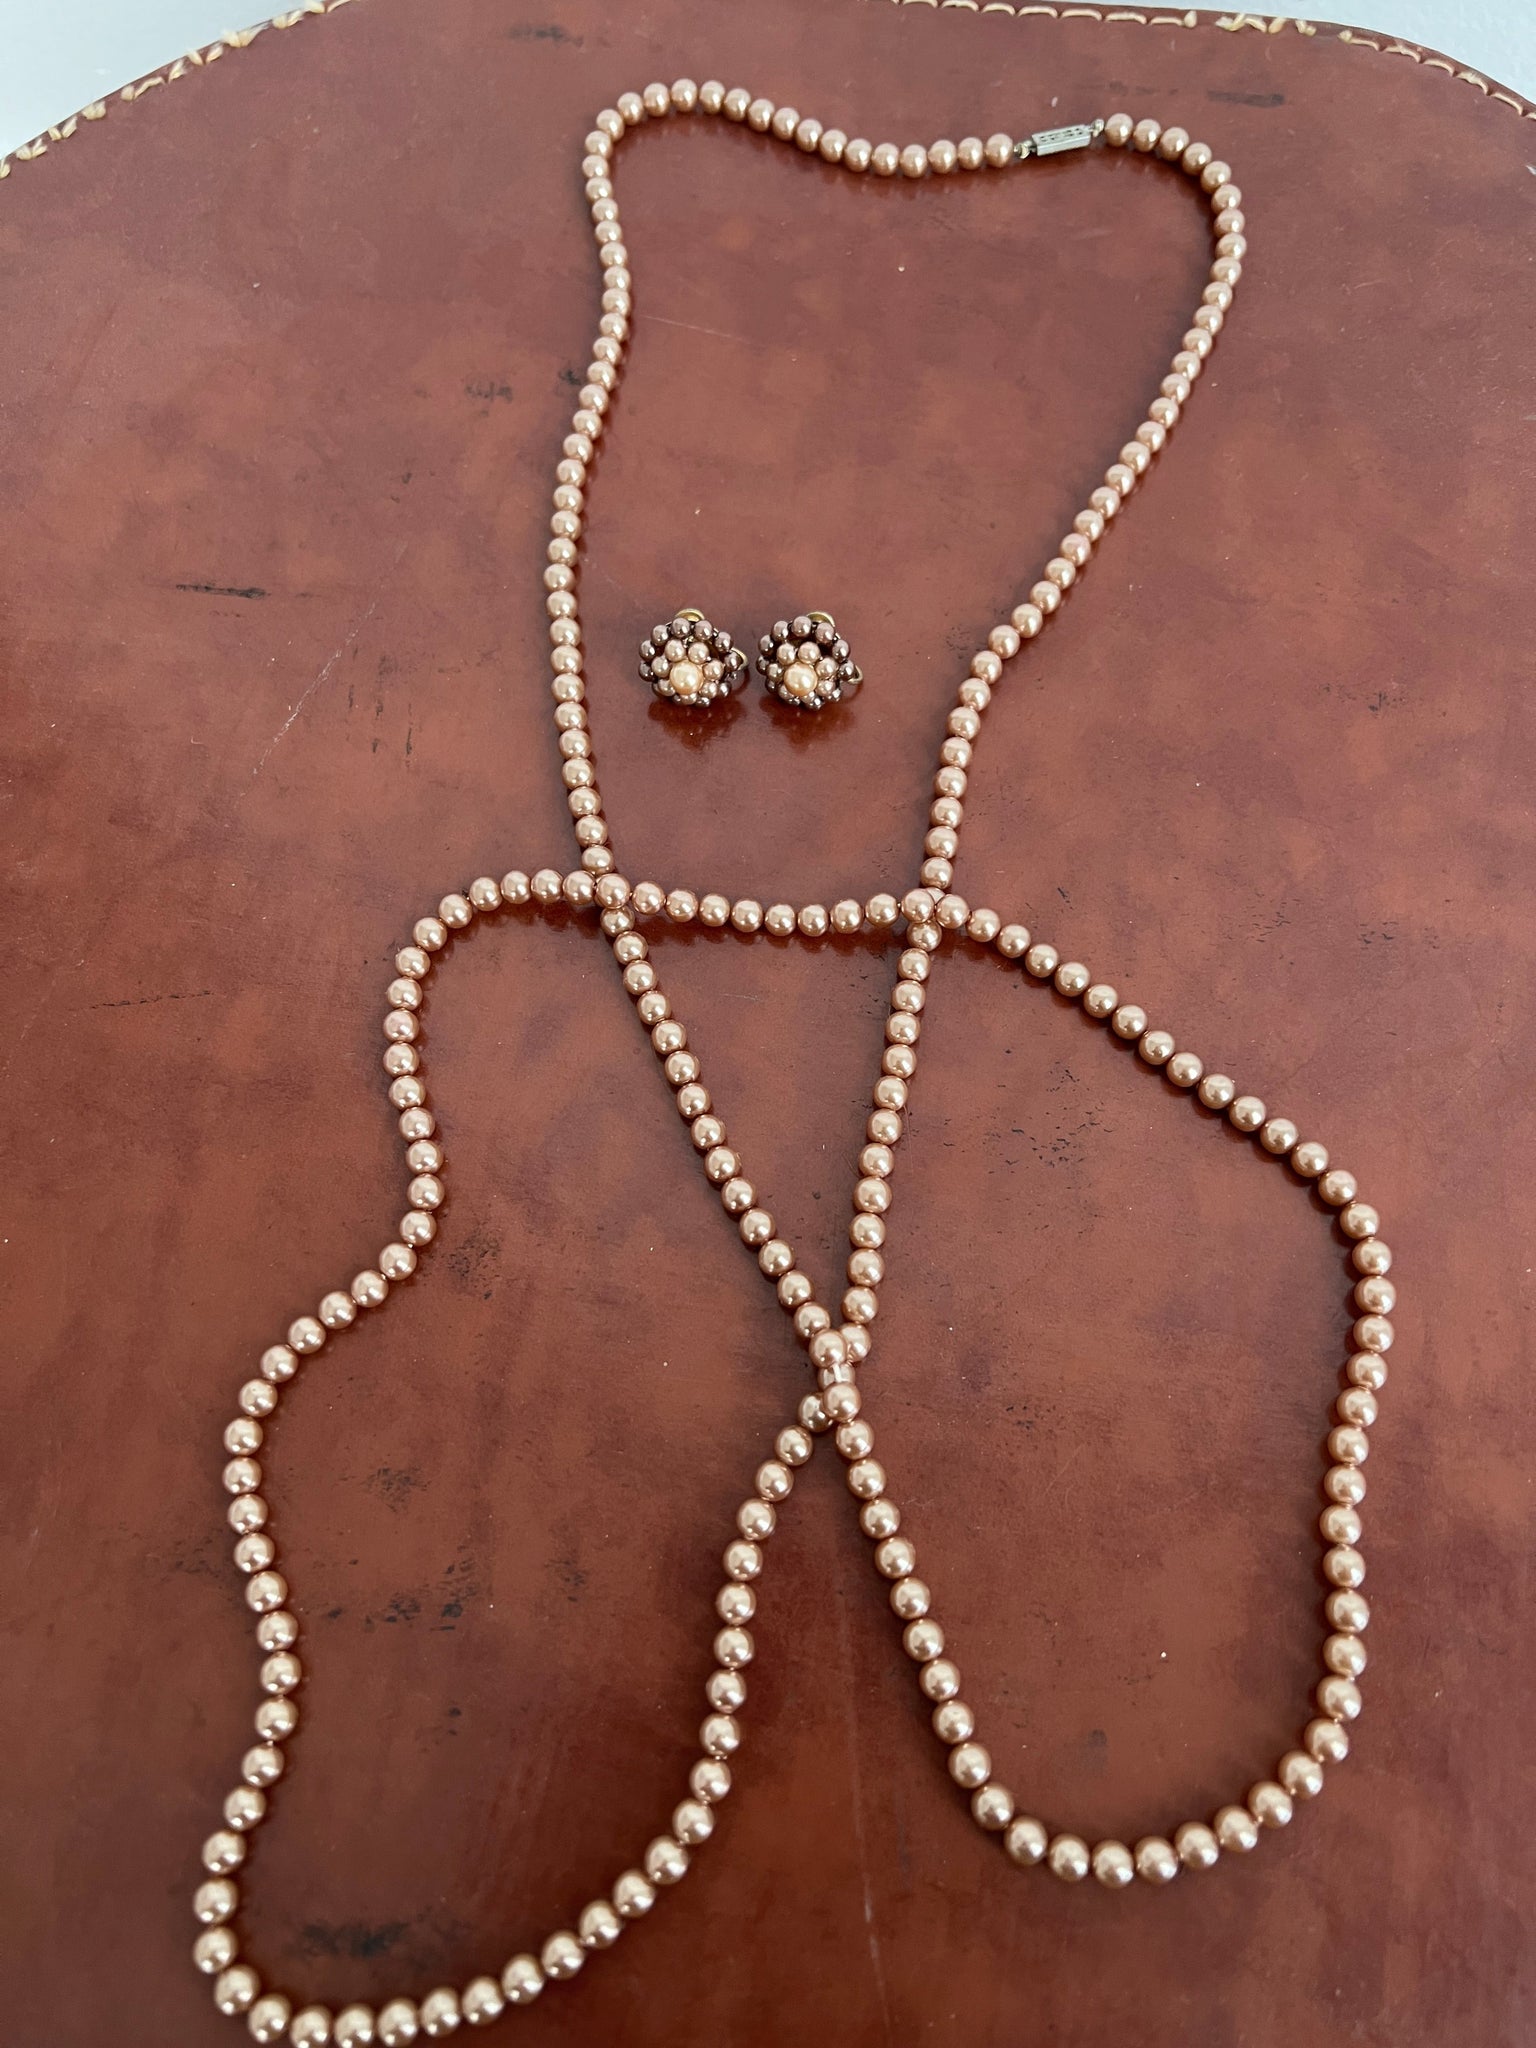 RENTAL Jewelry- Brown pearl necklace/ earring set. Replacement fee $295